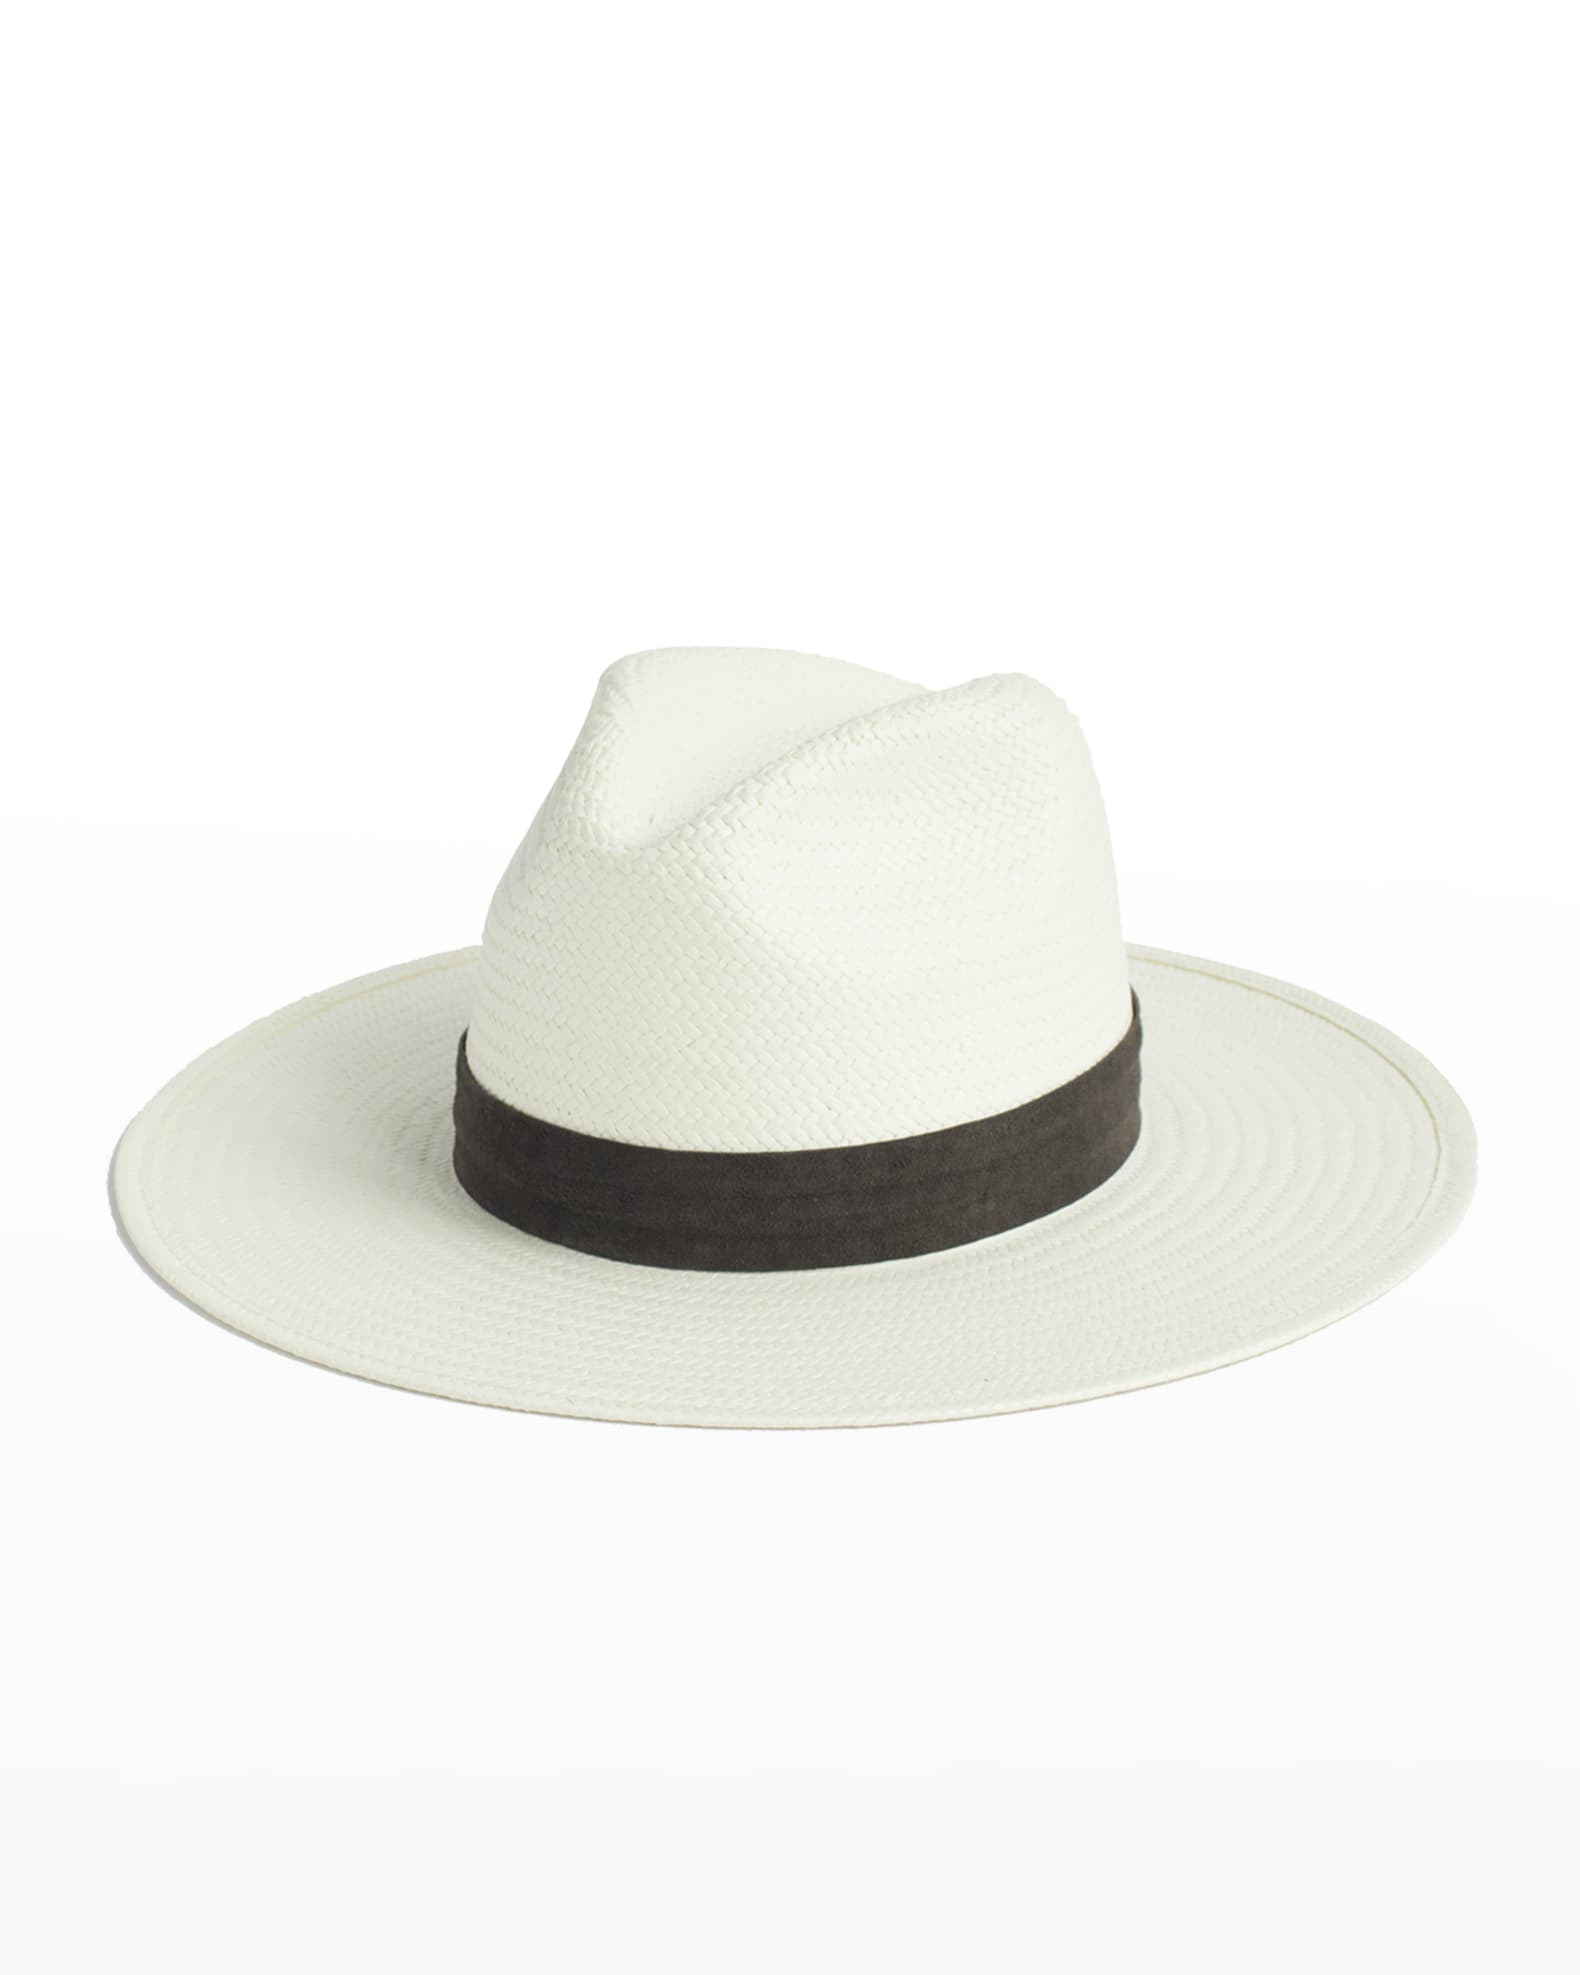 Janessa Leone Marcell Packable Straw Fedora Hat | Neiman Marcus